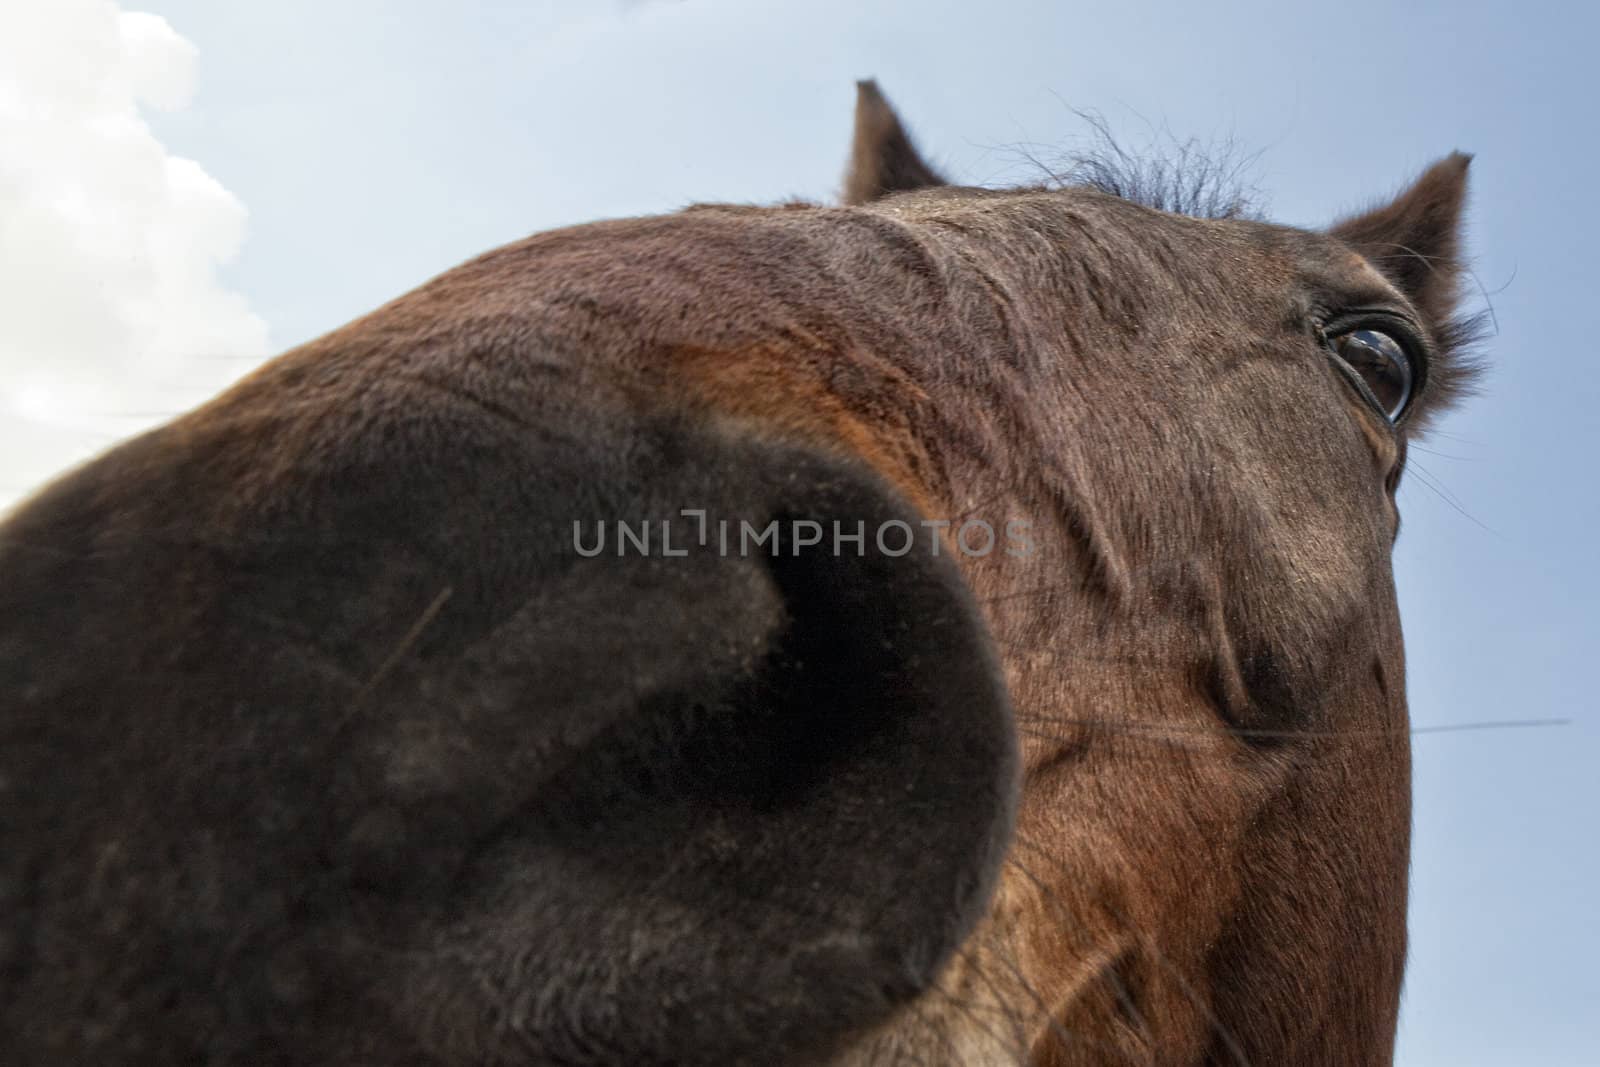 An unusual, almost comical, equestrian portrait shot at extreme close up